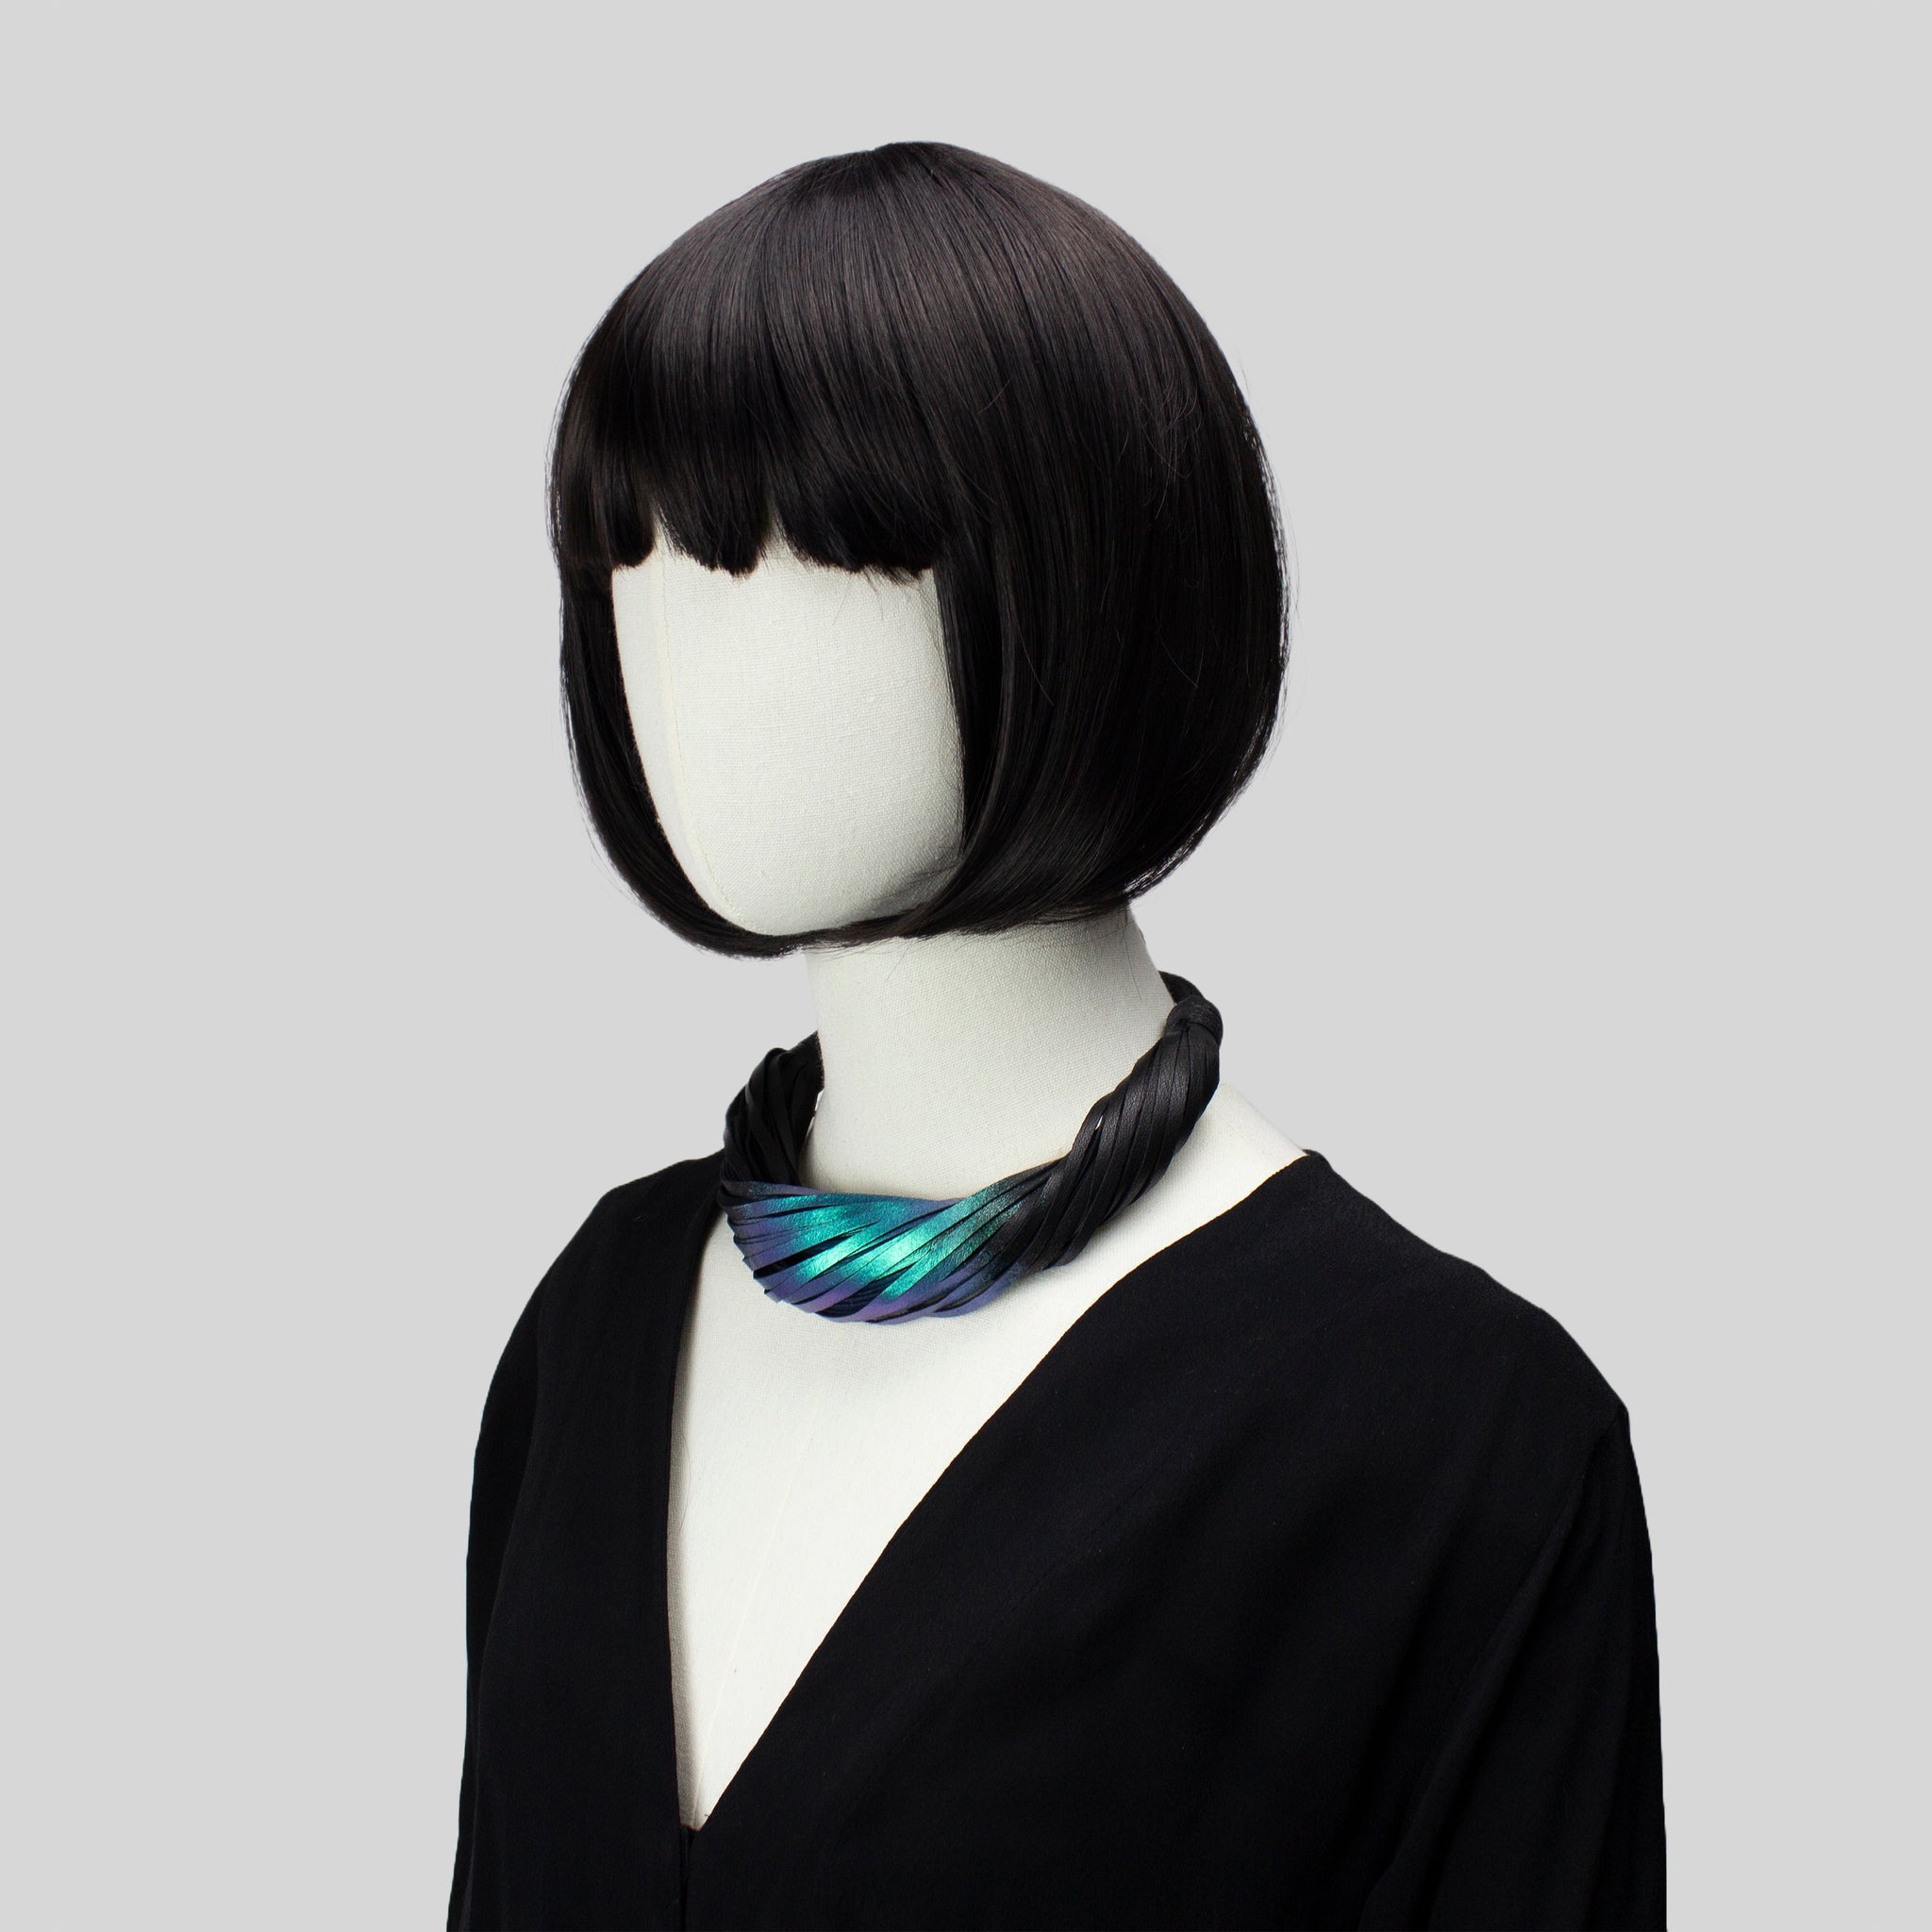 Multistrand recycled leather neckpiece / statement twisted fringe collar - black and turquoise